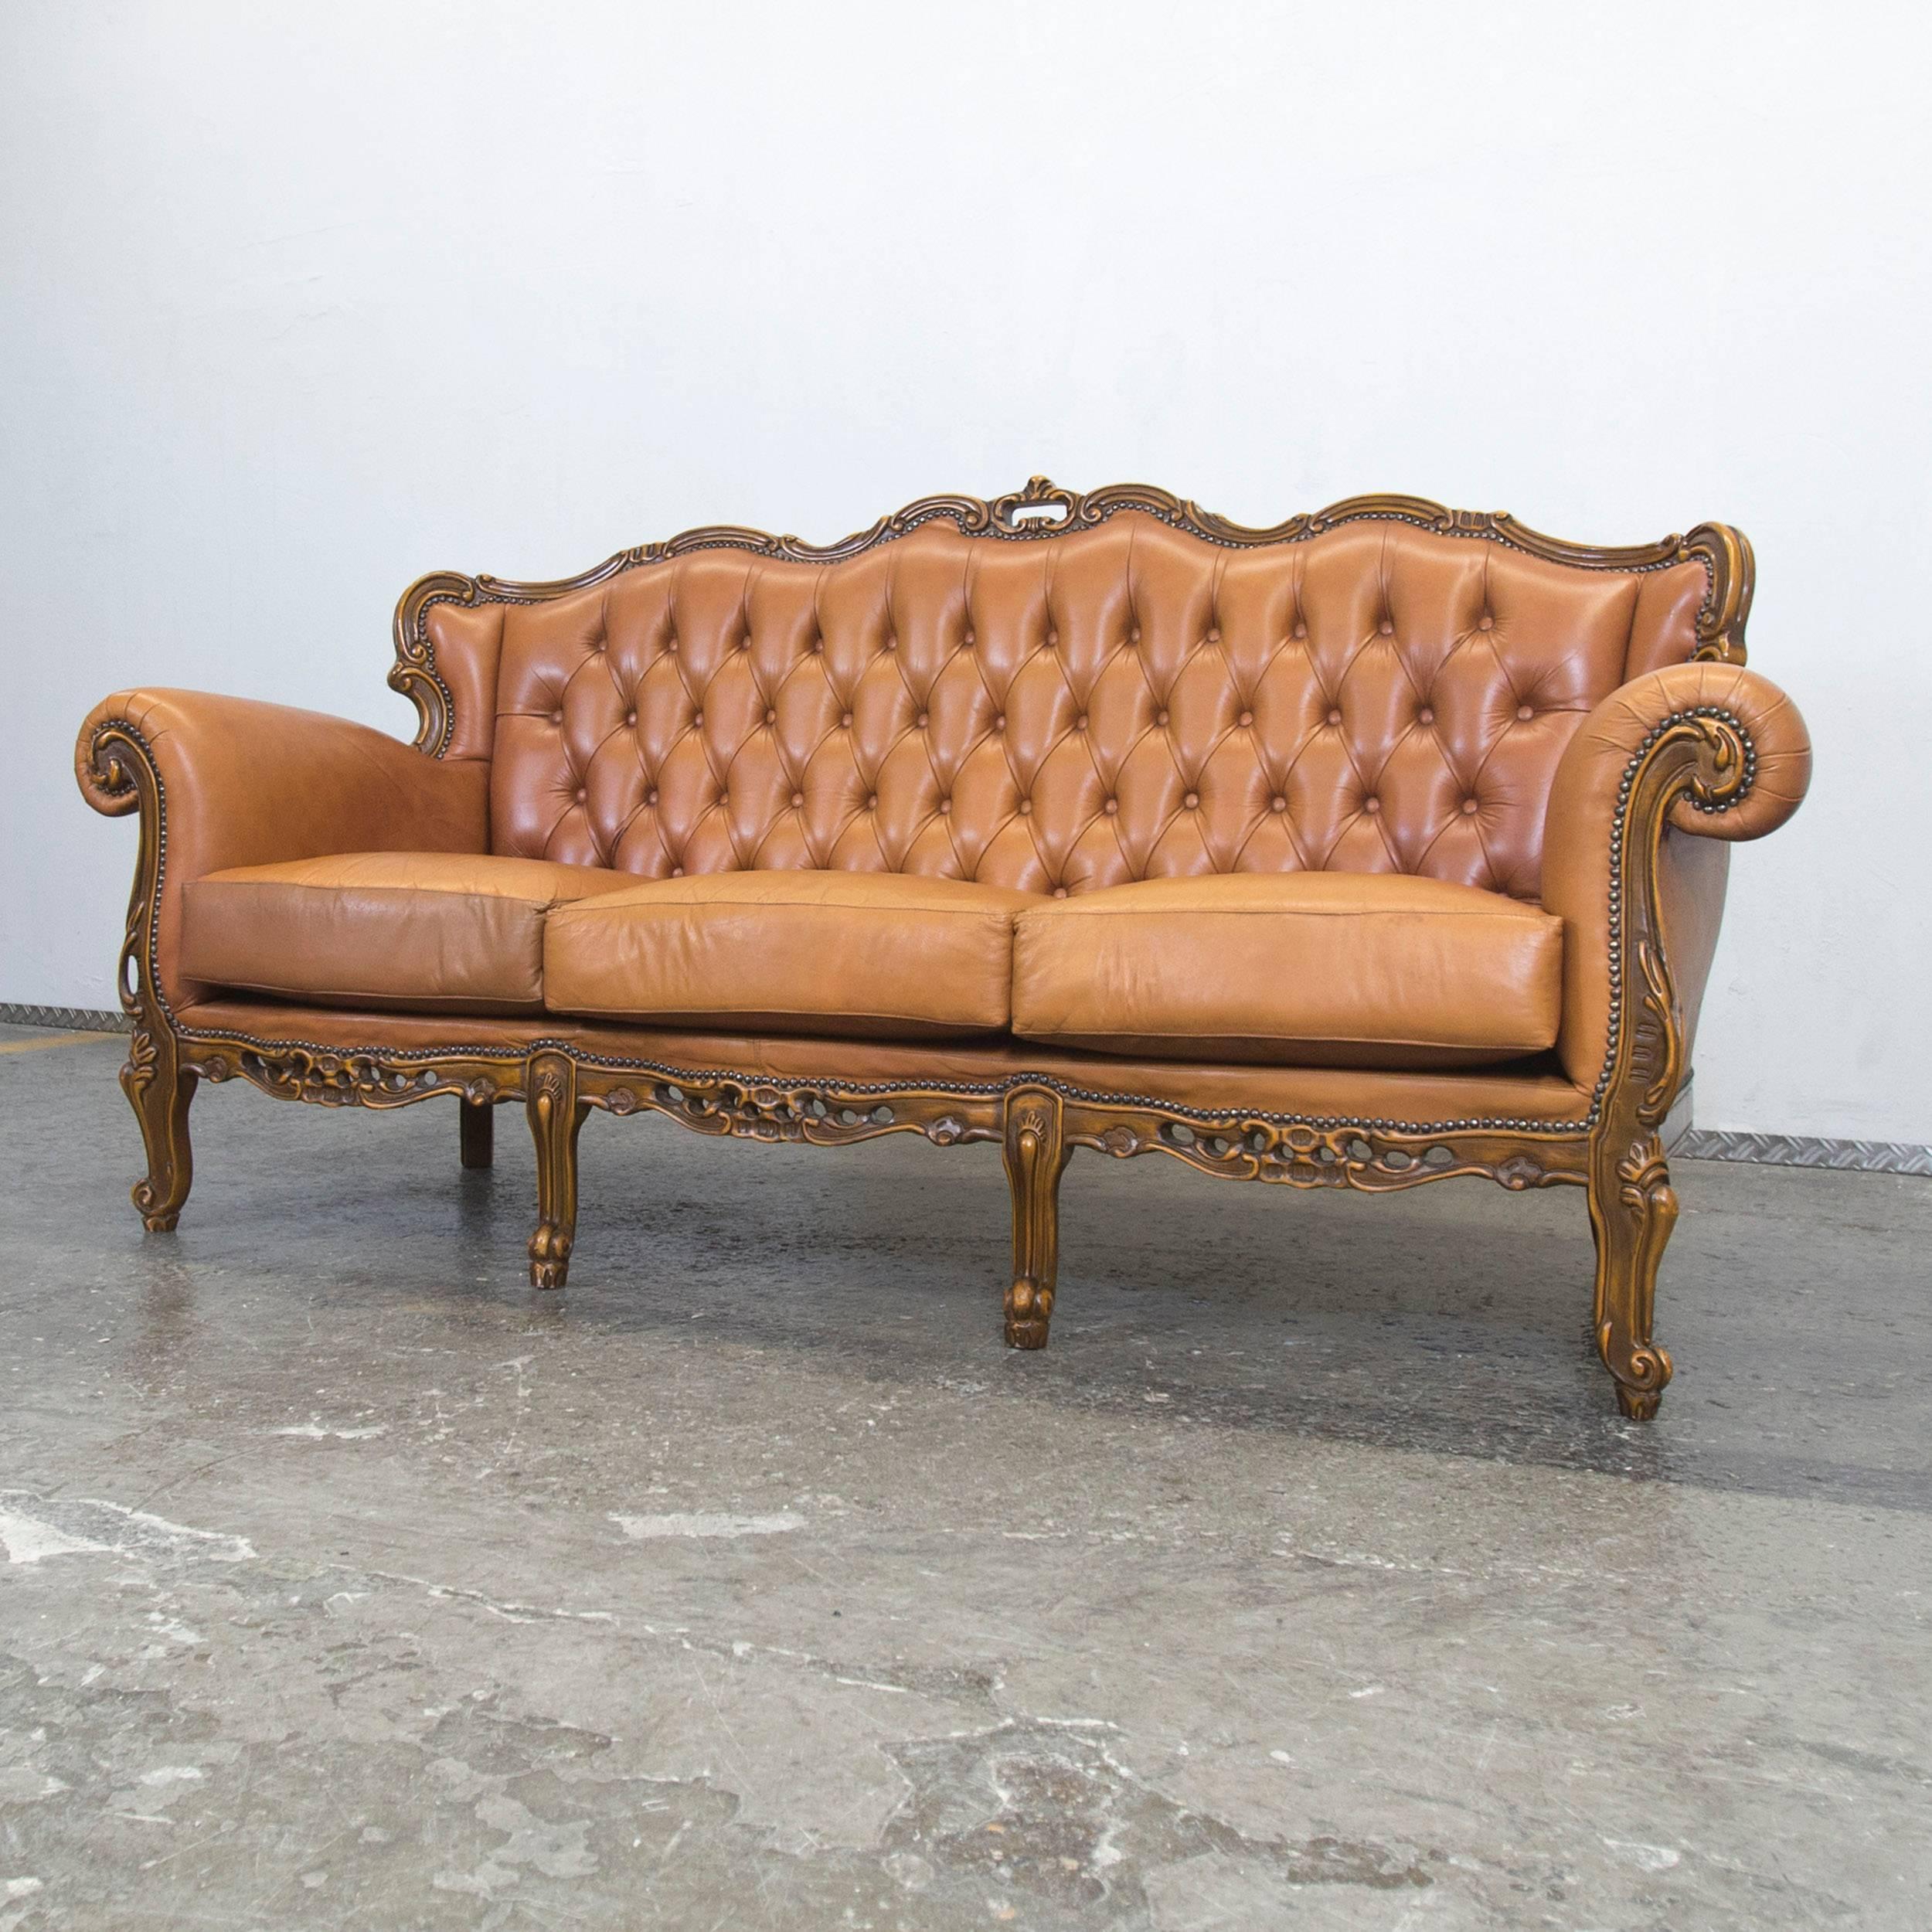 Elegant cognac colored leather Chesterfield sofa, with an intricate vintage design.